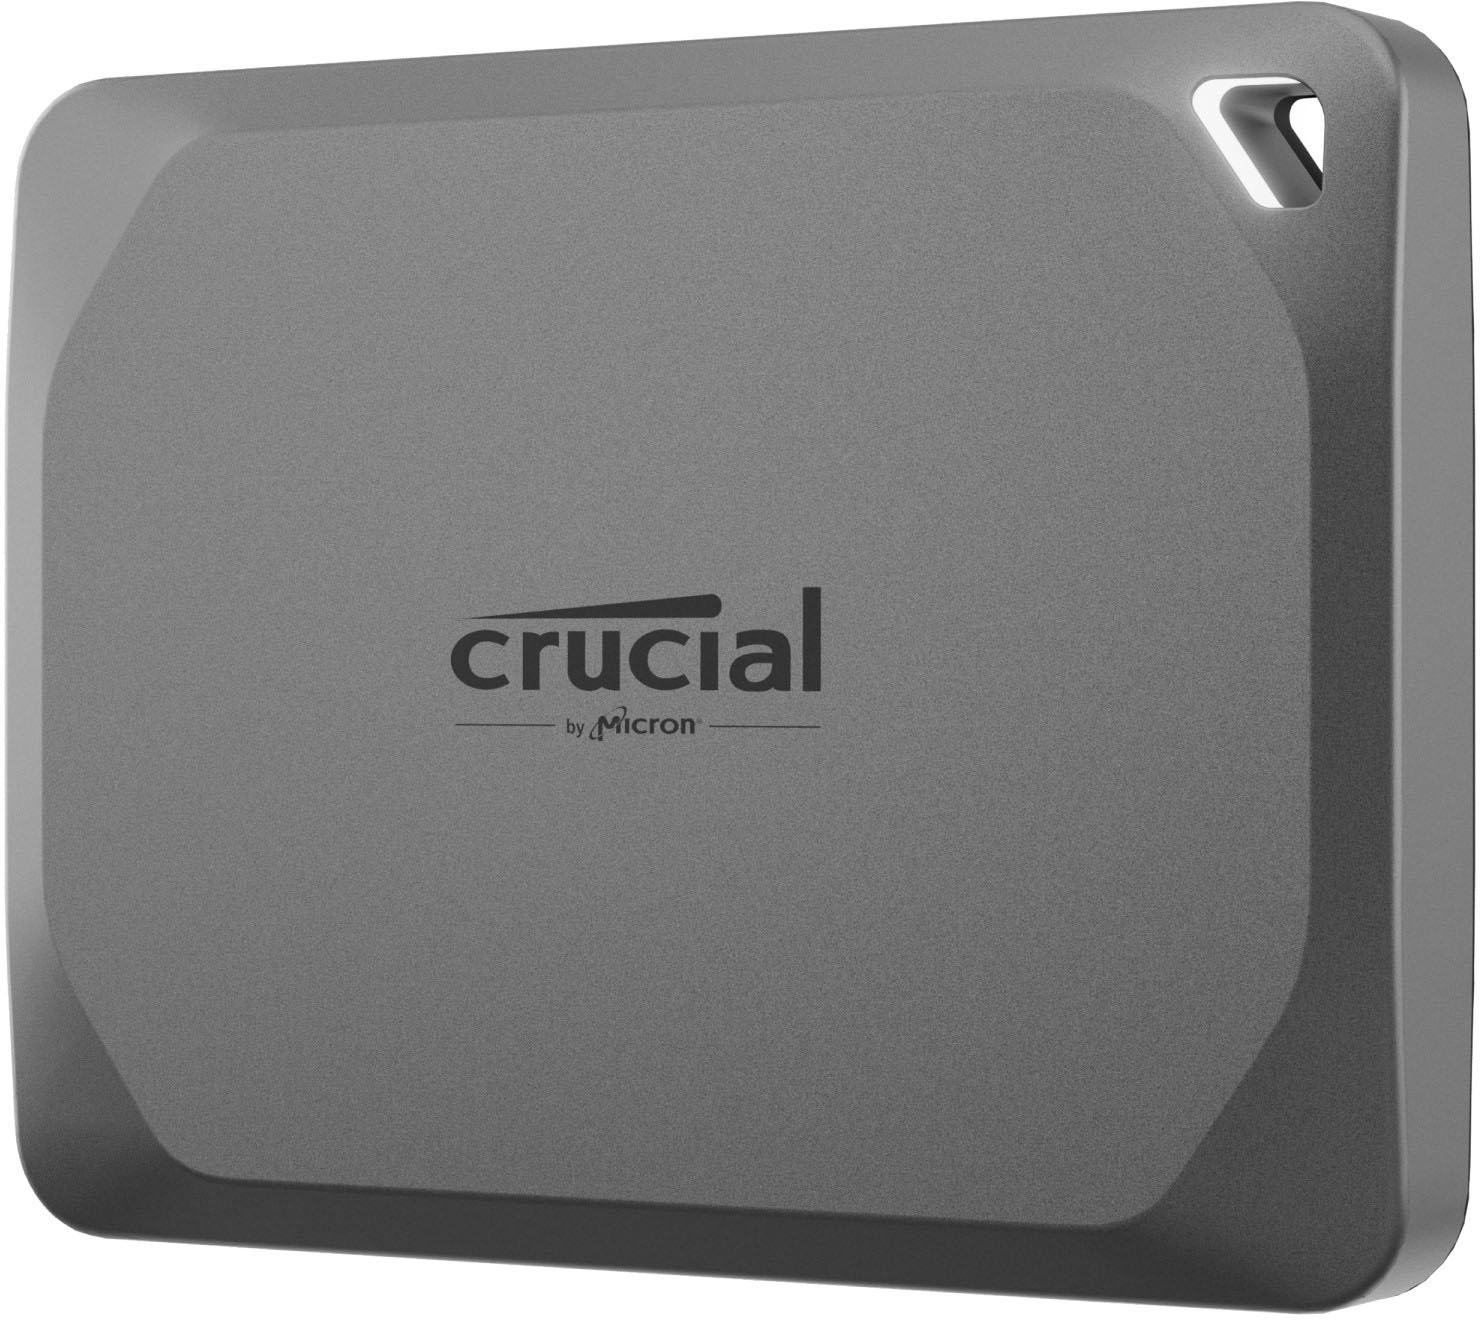 Crucial X9 Pro 1TB Portable SSD | CT1000X9PROSSD9 